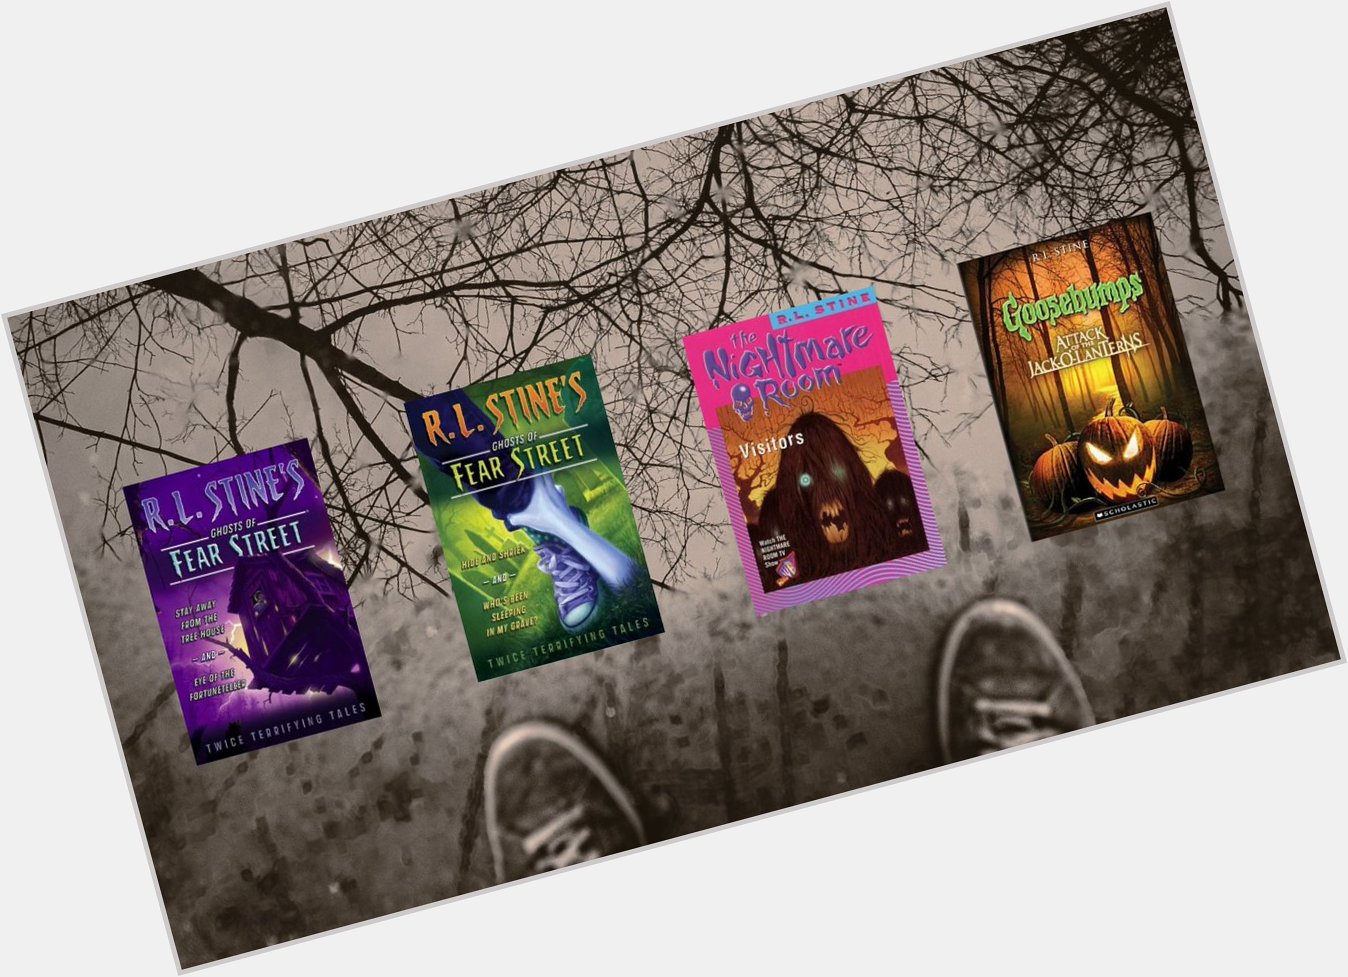 Happy birthday R.L. Stine! Find books sure to give you goosebumps at KCPL:  